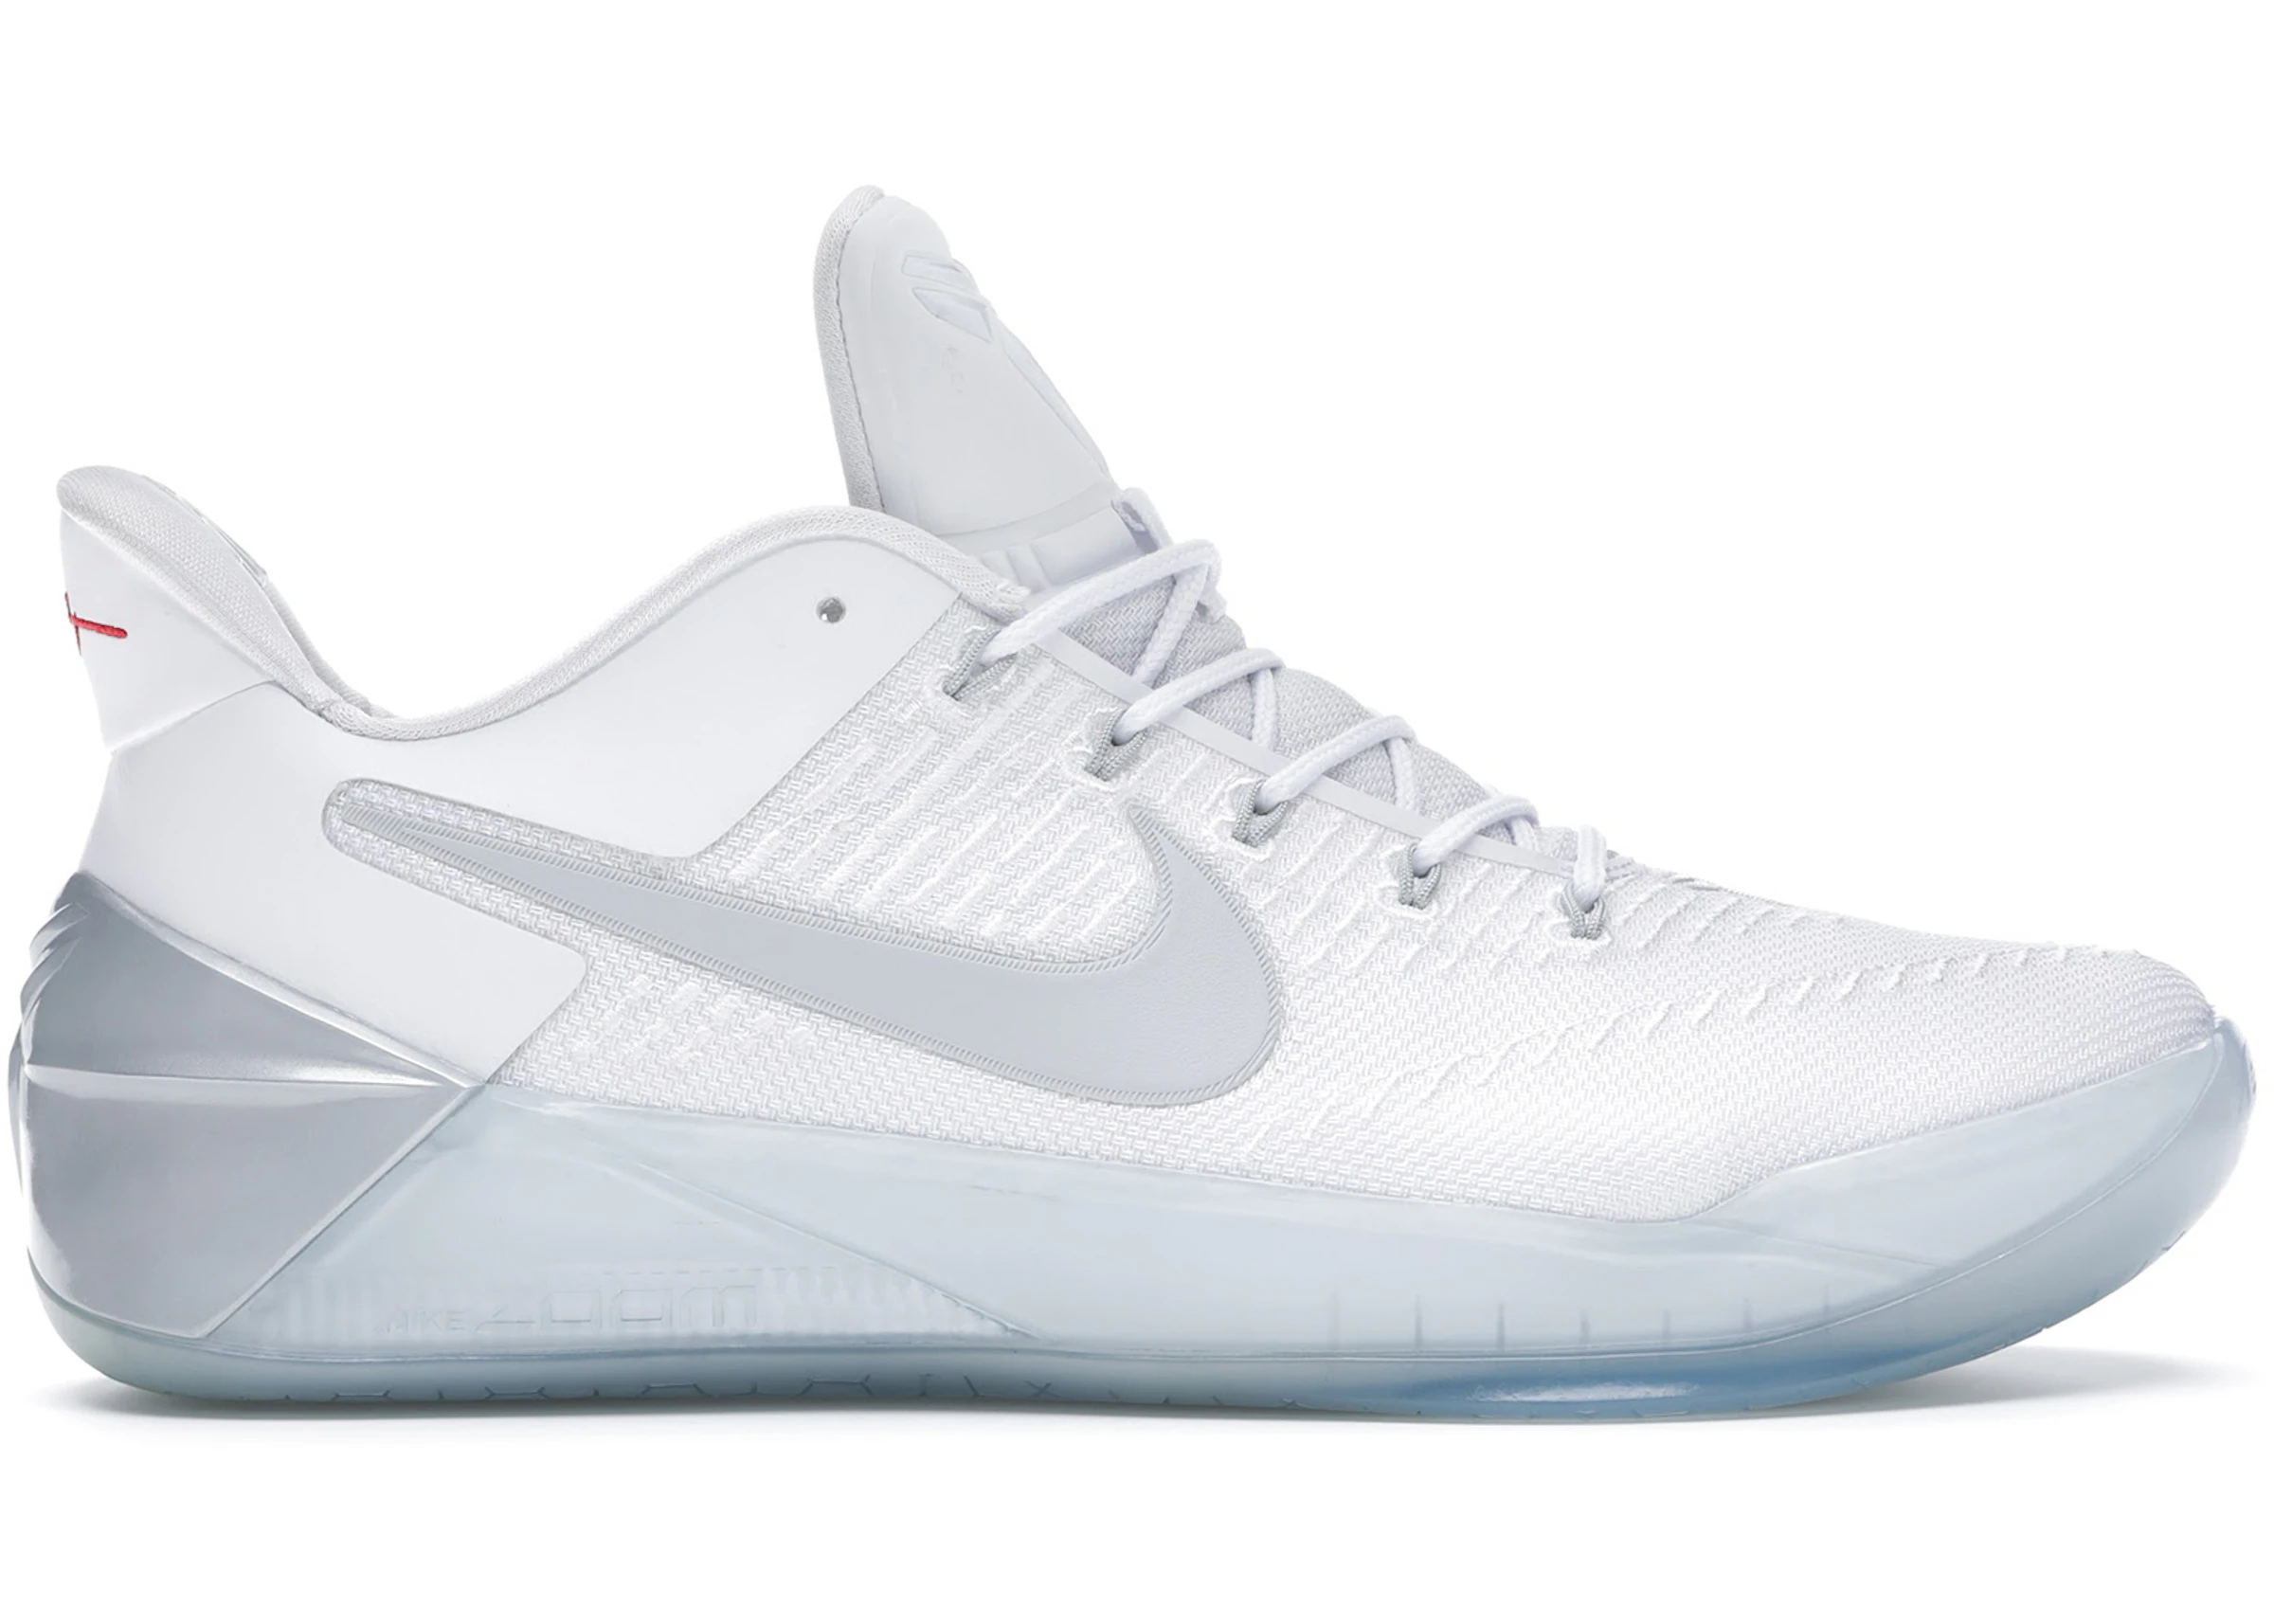 Buy Nike Kobe A.D. Shoes & New Sneakers - Stockx